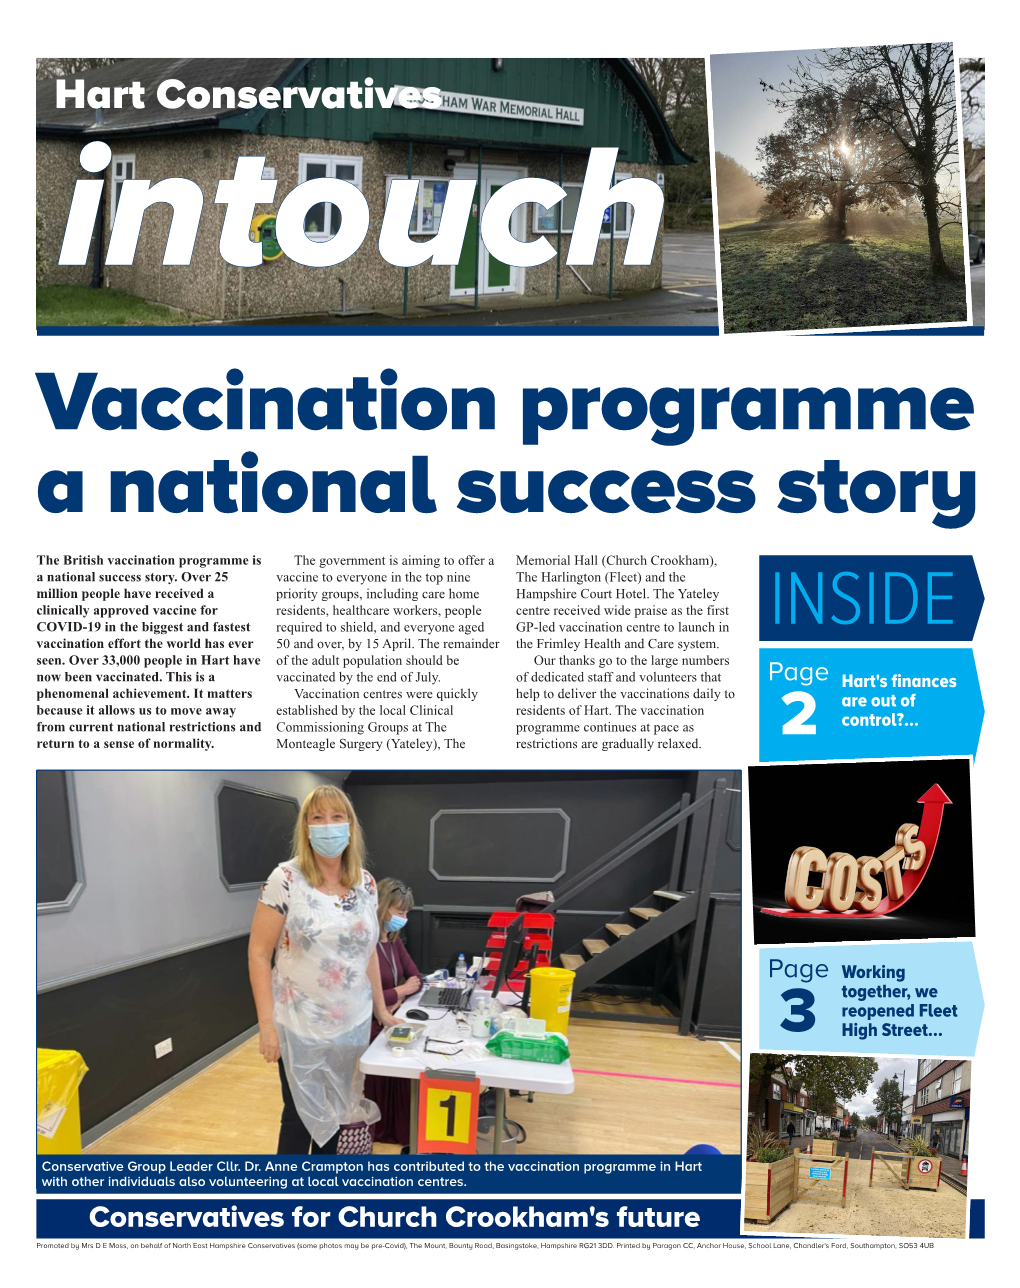 Vaccination Programme a National Success Story